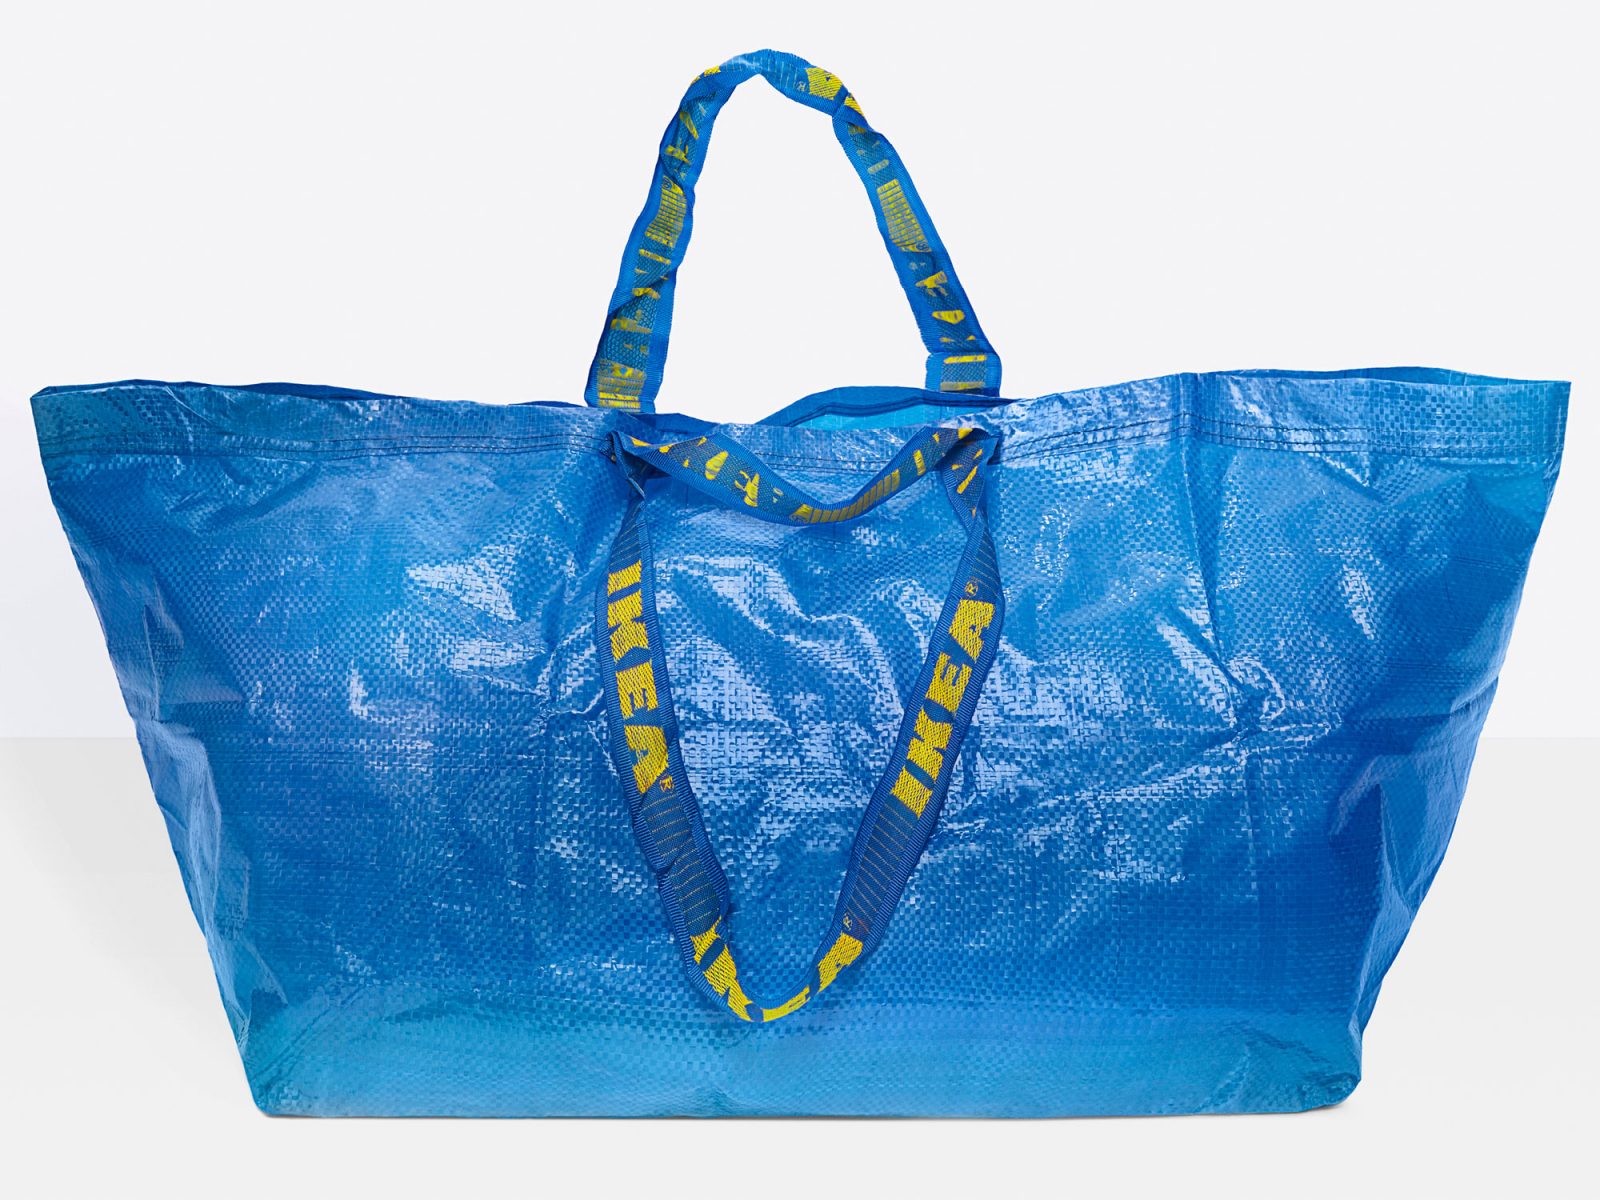 A blue FRAKTA bag with IKEA in yellow on the handles.